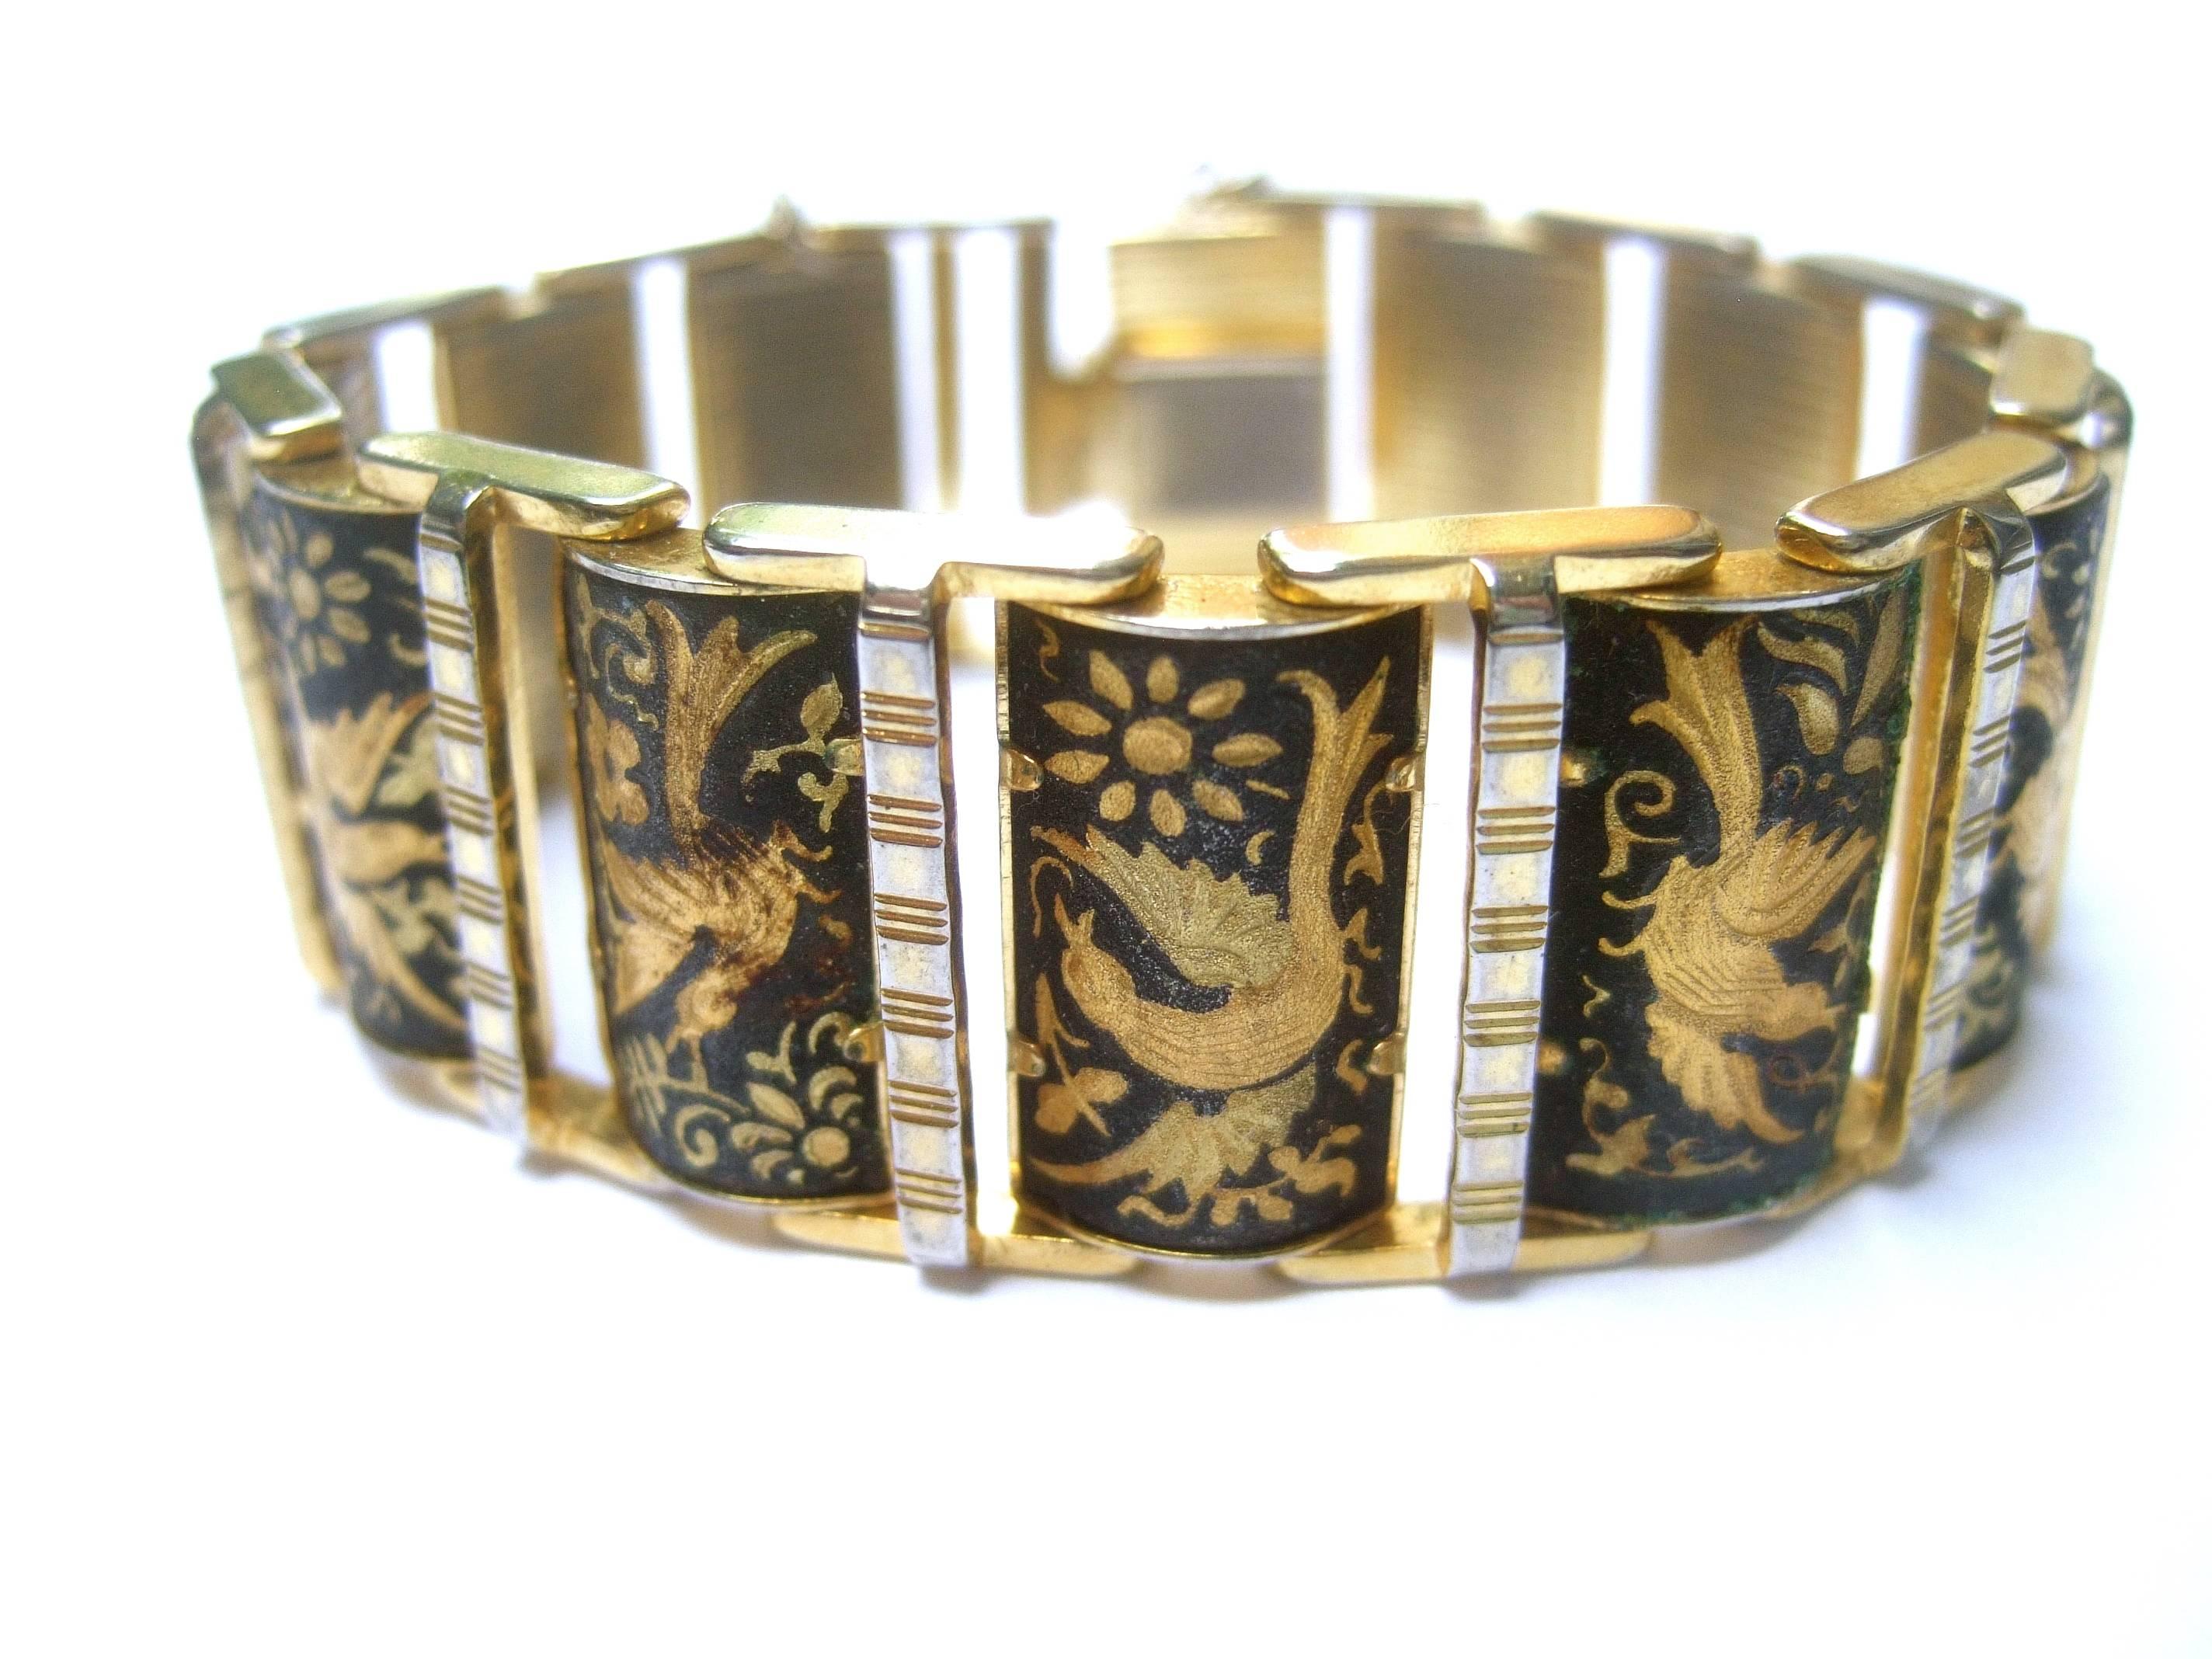 Exquisite etched gilt metal bird theme link bracelet ca 1960
The elegant retro bracelet is designed with a series 
of hinged links

Each link depicts a majestic bird in various postures
The collection of birds have intricate etched detail 
that